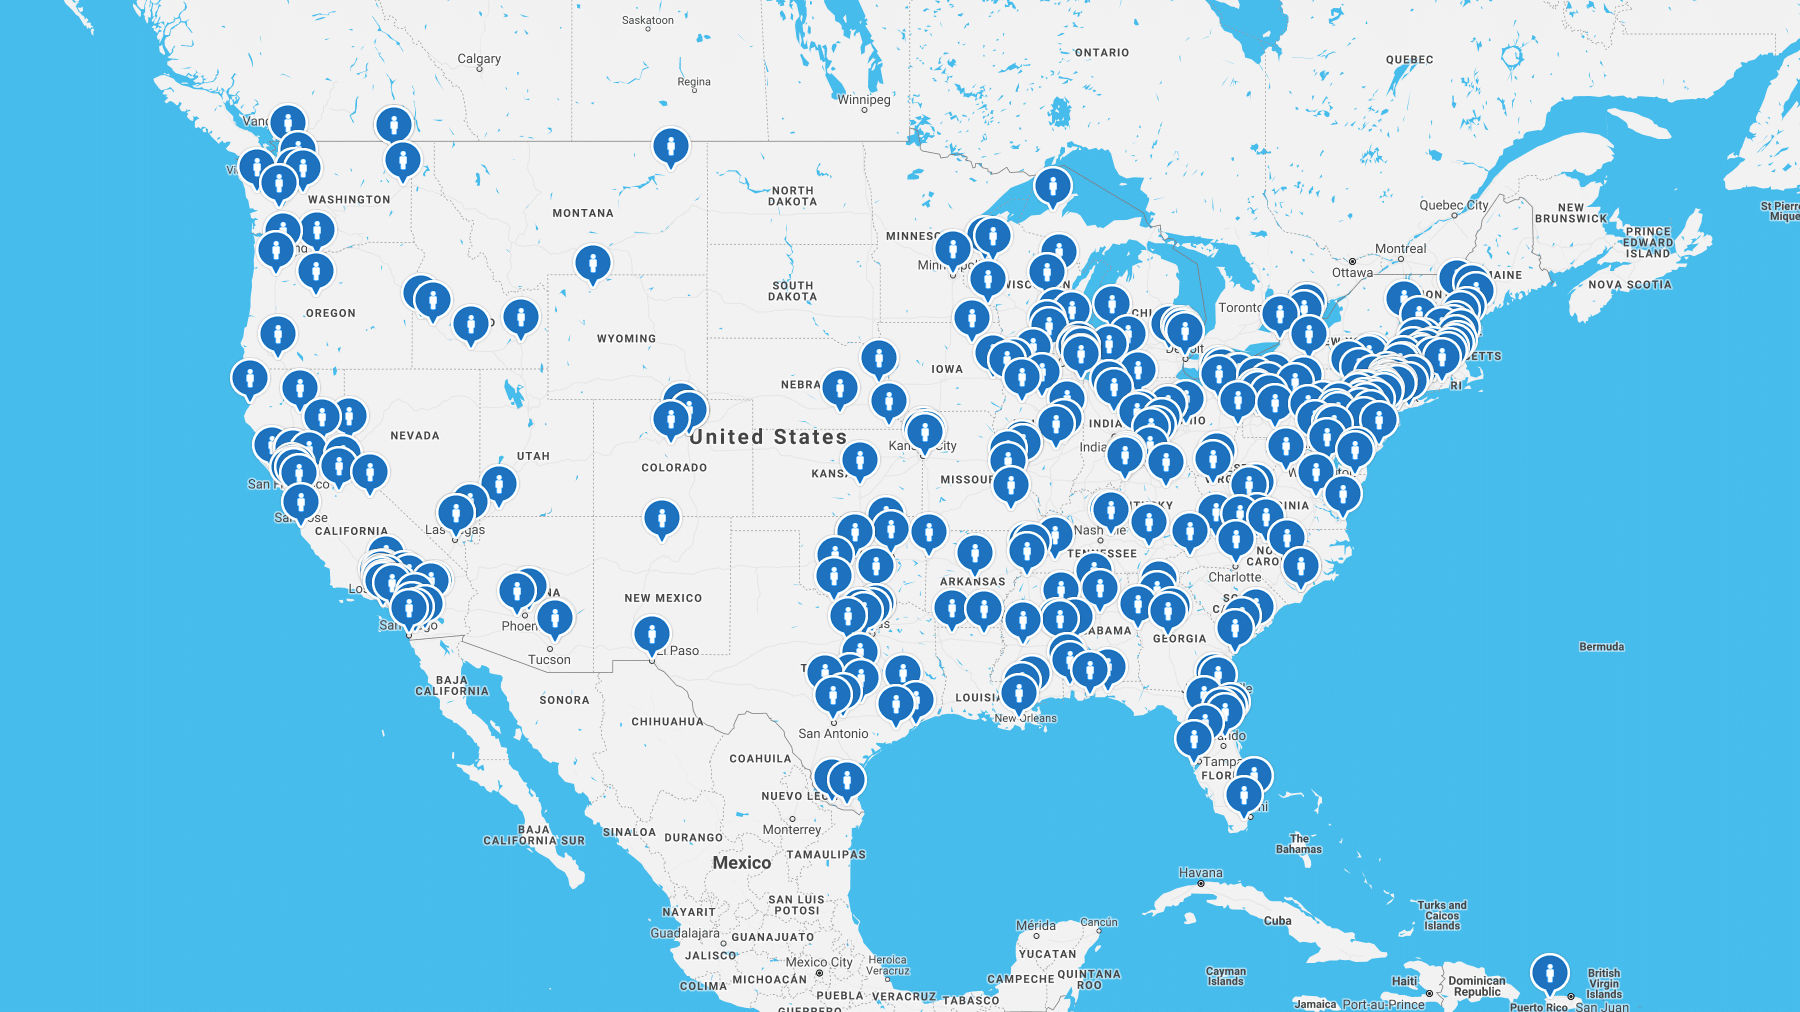 Abused in Scouting Abuse Map